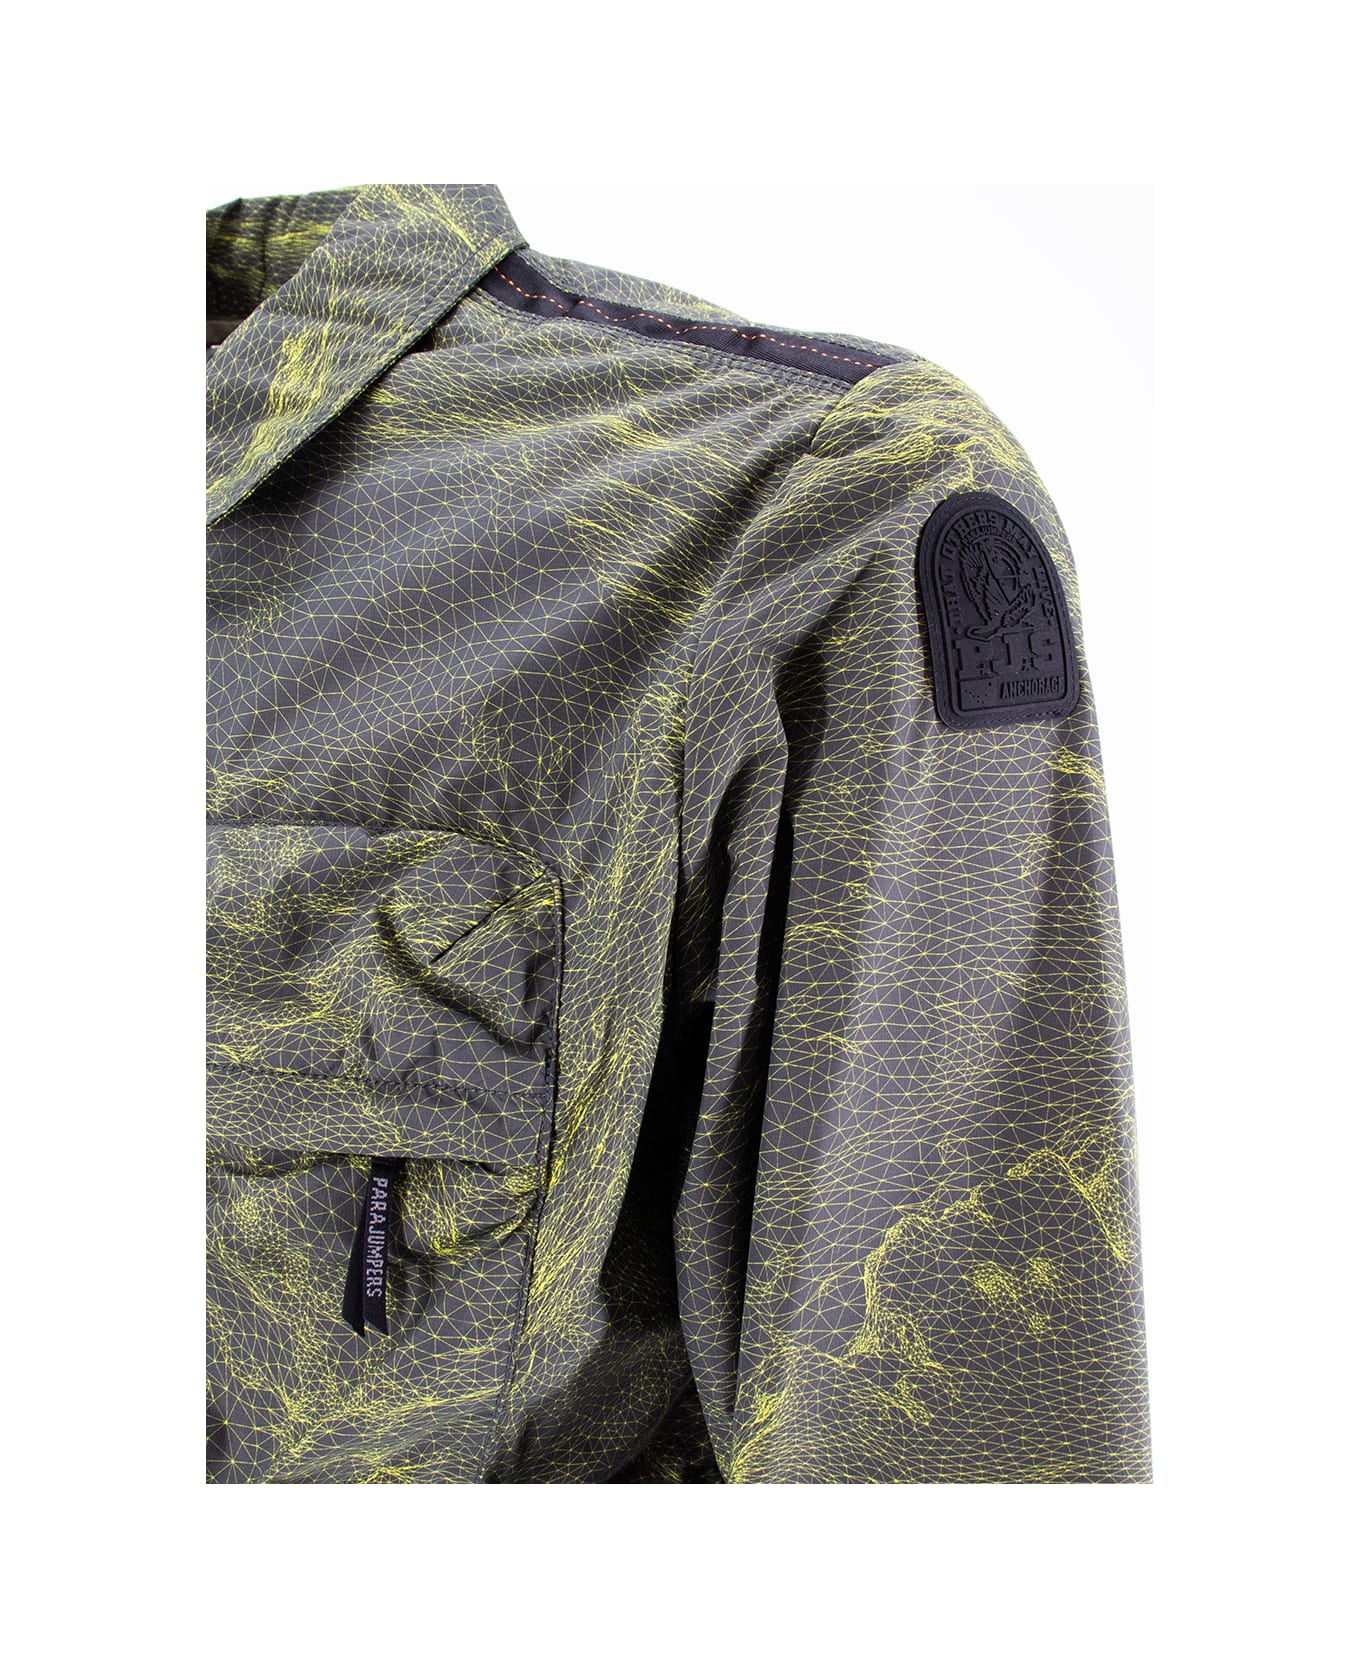 Parajumpers Jacket - TOUBRE WIREFRAME PRINT